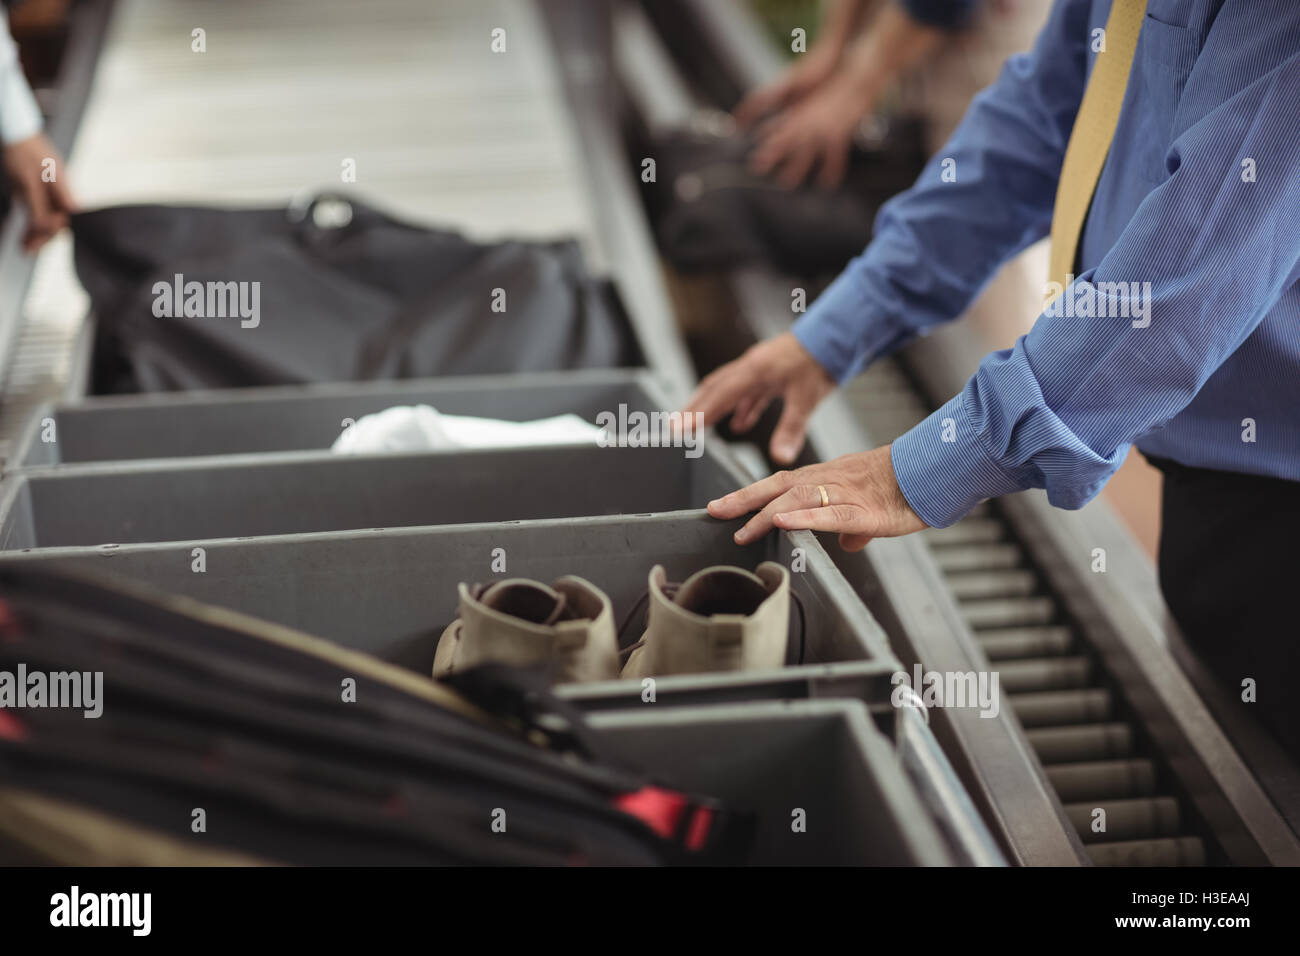 Man putting shoes into tray for security check Stock Photo